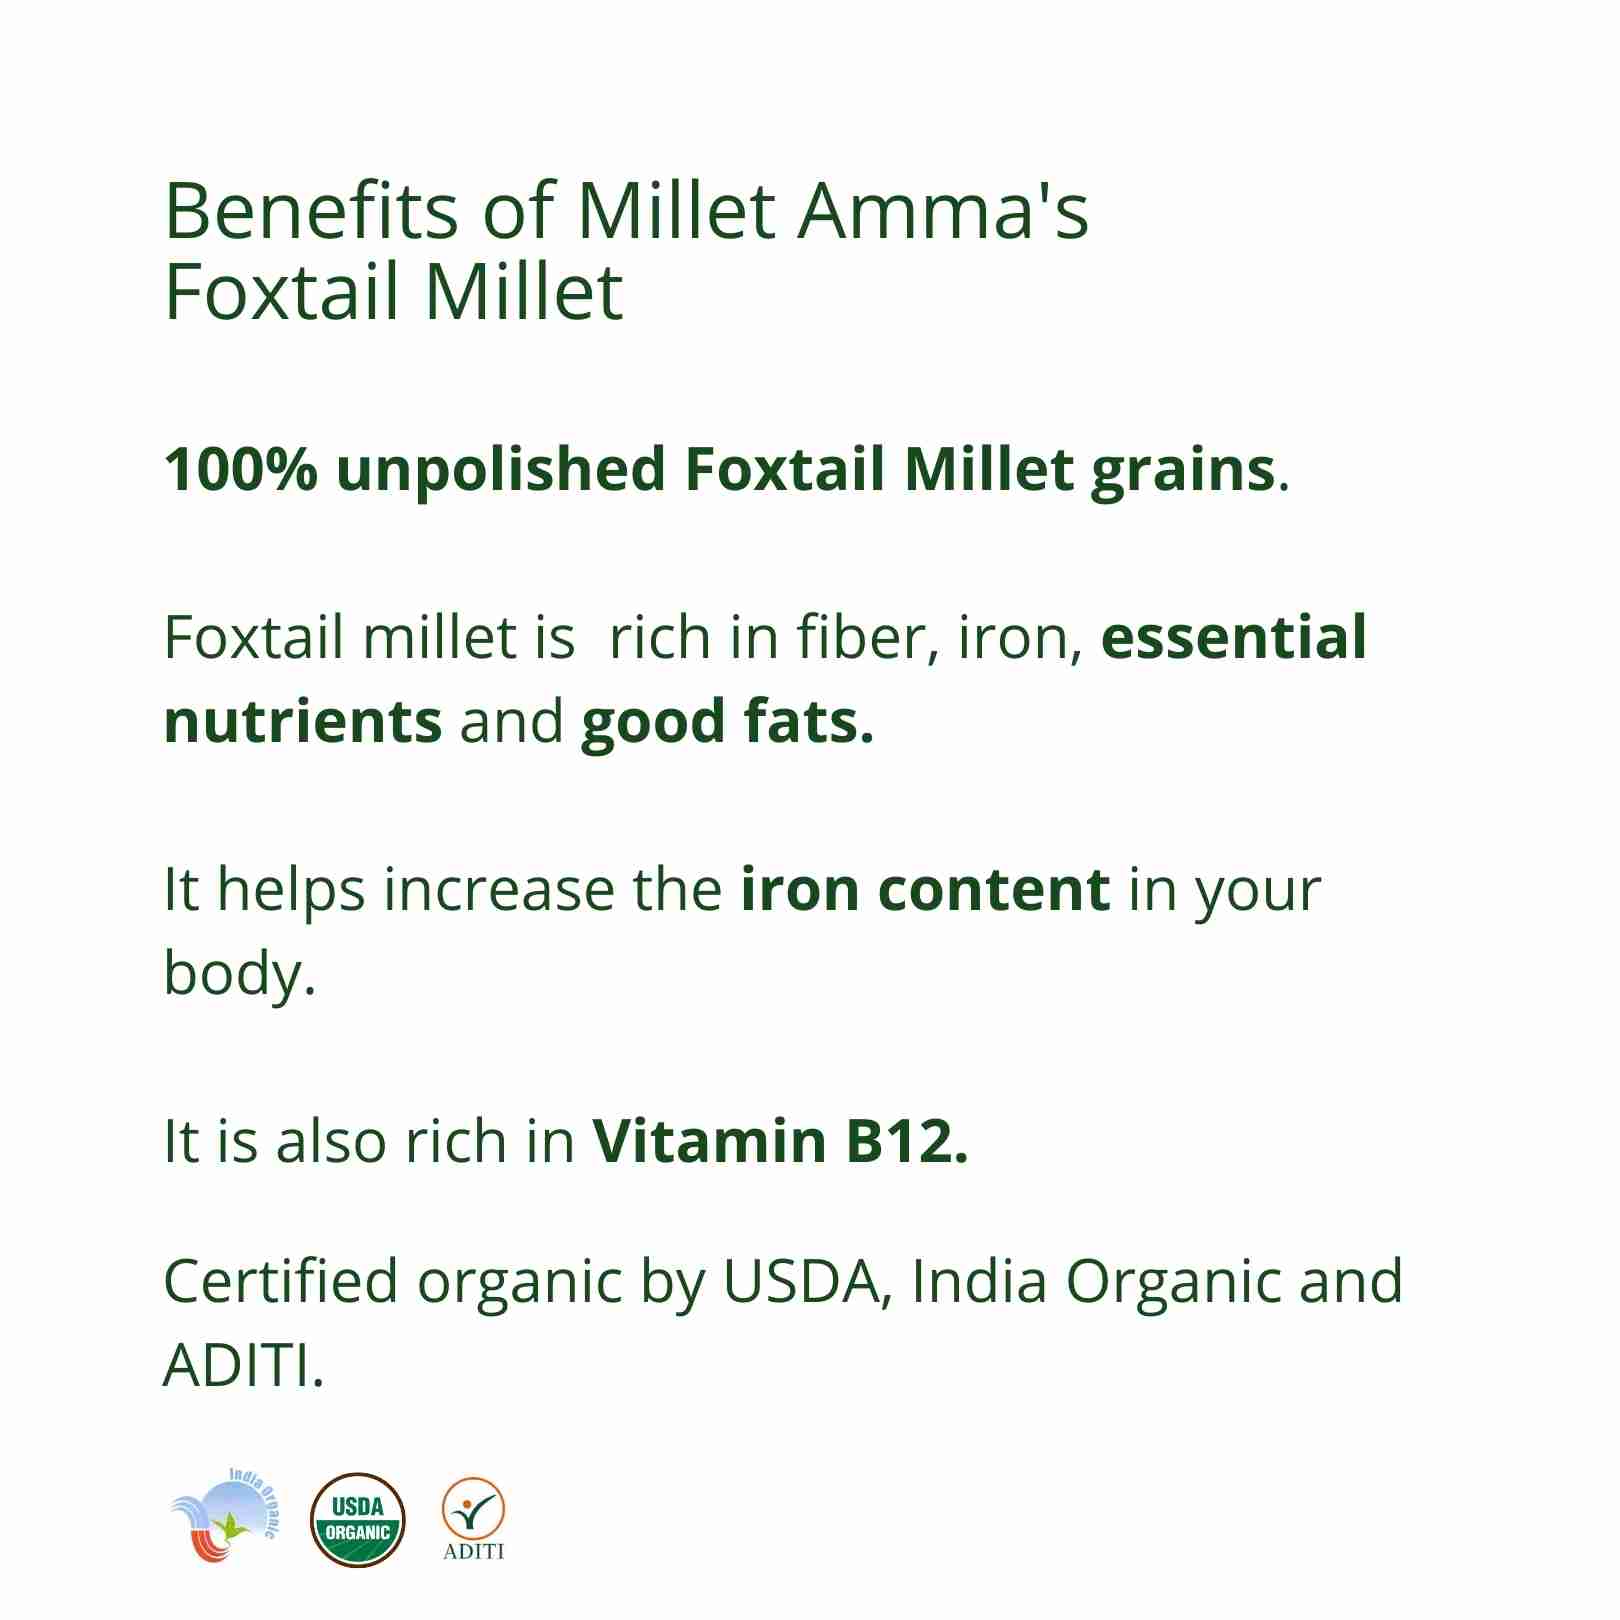 Millet Amma’s Organic Foxtail Millet Grains- Millet Amma’s nutritious Organic Foxtail Millet Grains are rich in fiber, iron and Vitamin B12. Our premium unpolished Foxtail Millets, offer you a daily dose of essential proteins and good fats.  You can use it as a replacement for rice, you can use it to make all the dishes you normally use rice for. It is an ideal option for people following a millet diet; it also aids in weight management.